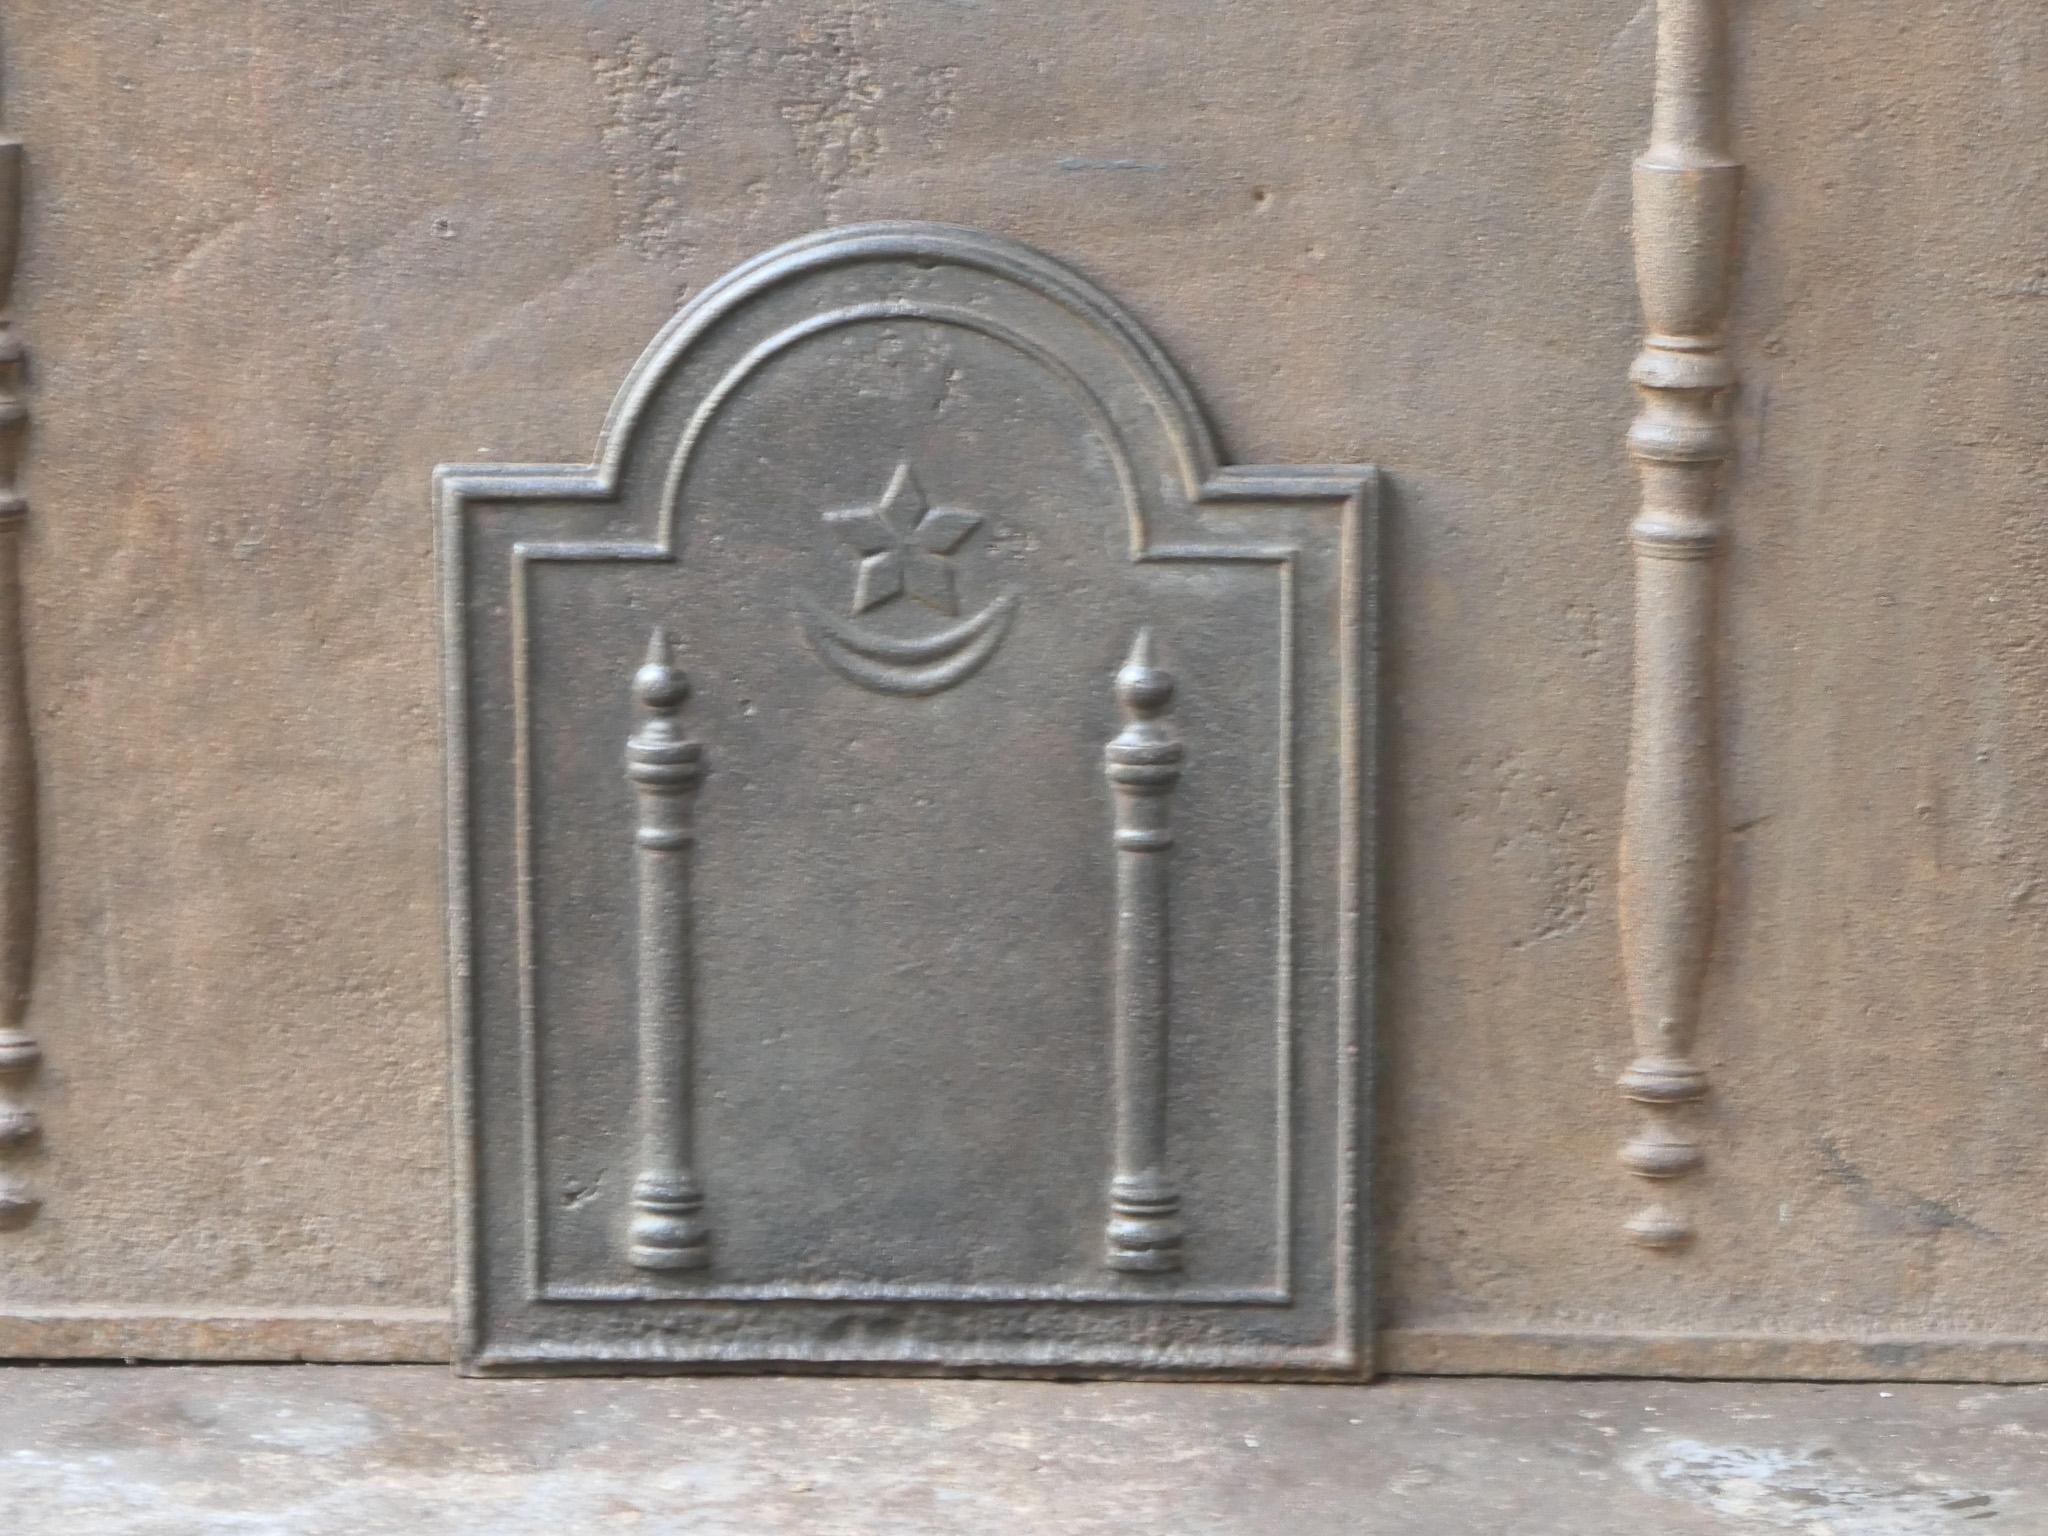 18th - 19th century French neoclassical fireback with two pillars of freedom. The pillars symbolize the value liberty, one of the three values of the French revolution. 

The fireback is made of cast iron and has a natural brown patina. Upon request